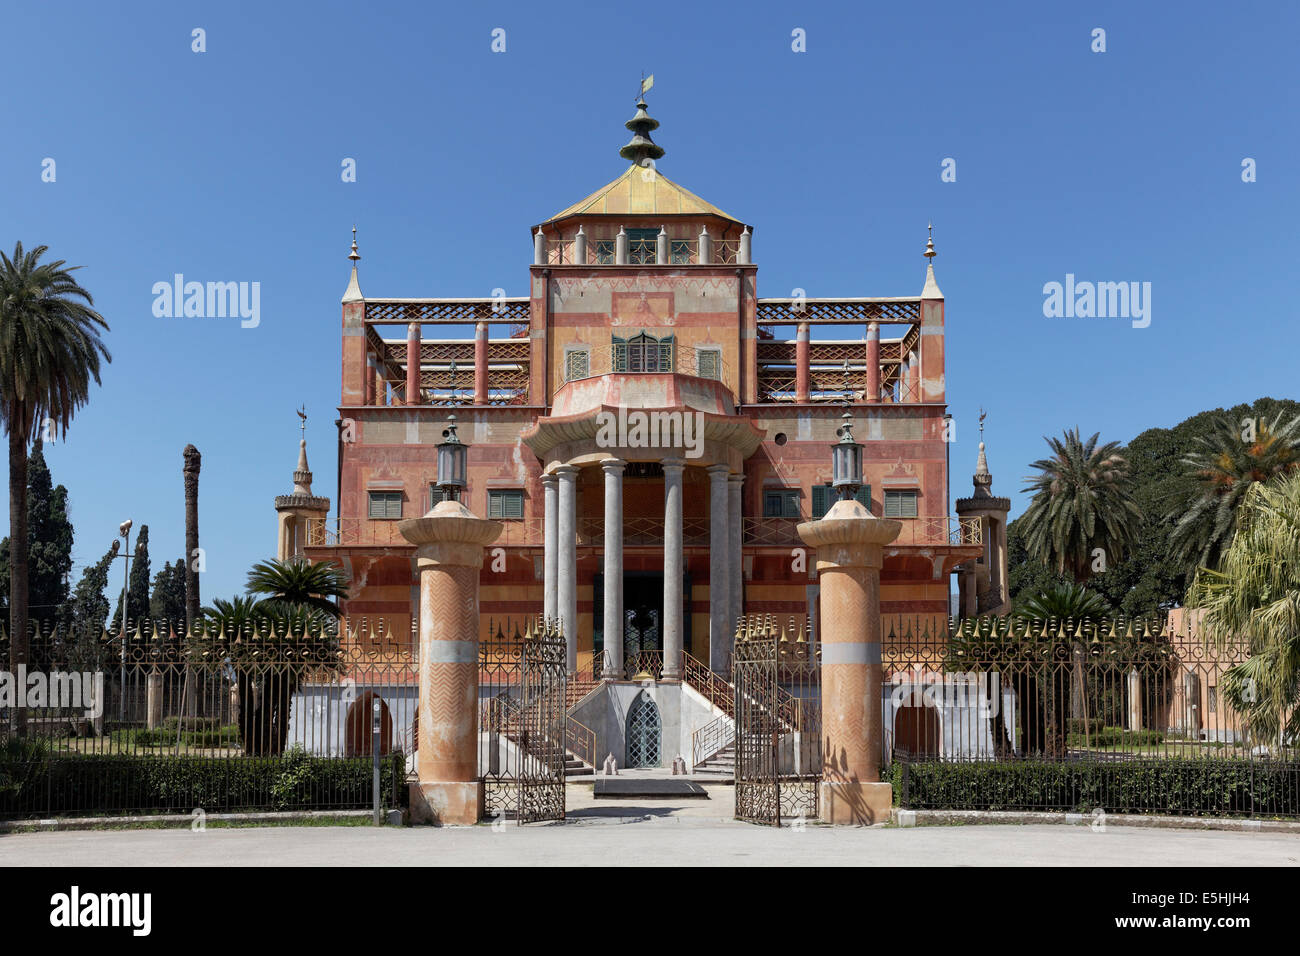 Former Bourbon Royal Palace built in an oriental style, Palazzina Cinese or Casina Cinese, Palermo, Sicily, Italy Stock Photo